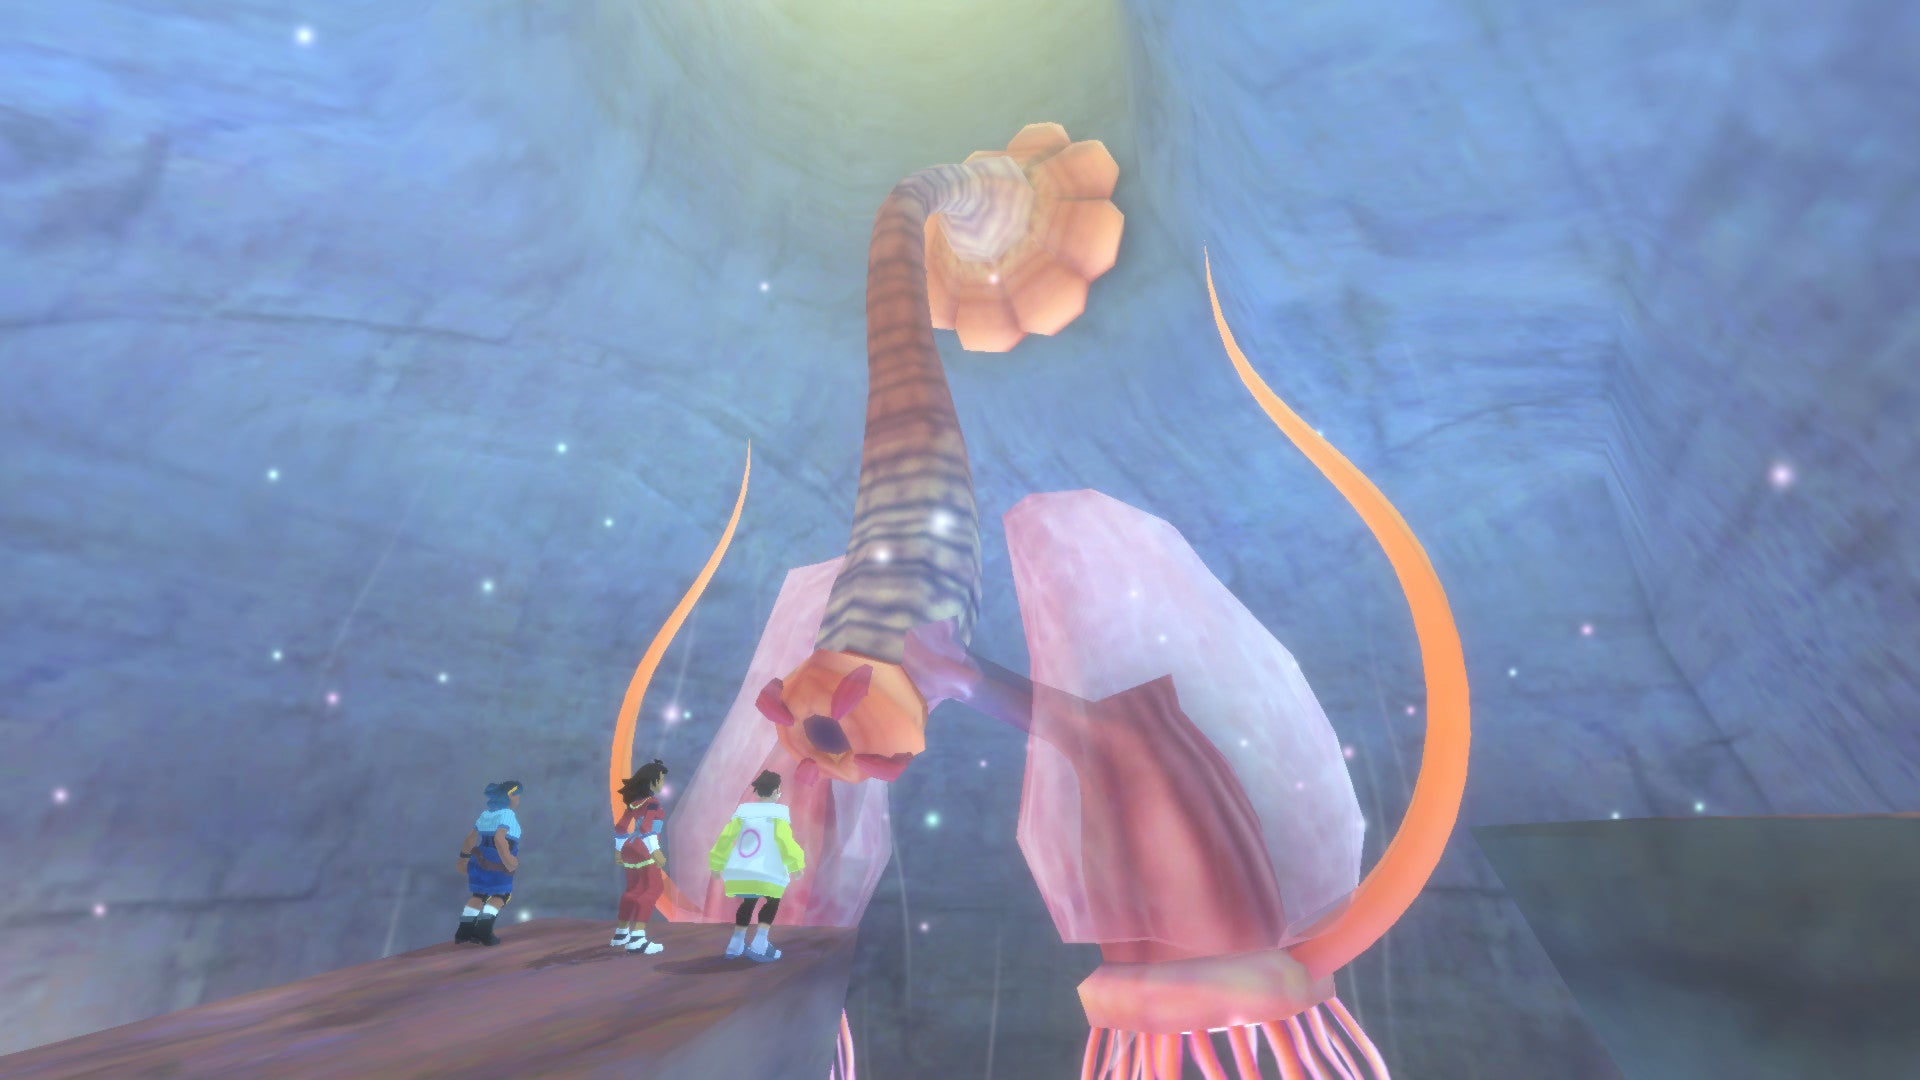 The three main characters of Sephonie observing a lifeform that looks like a giant pair of lungs growing a flower